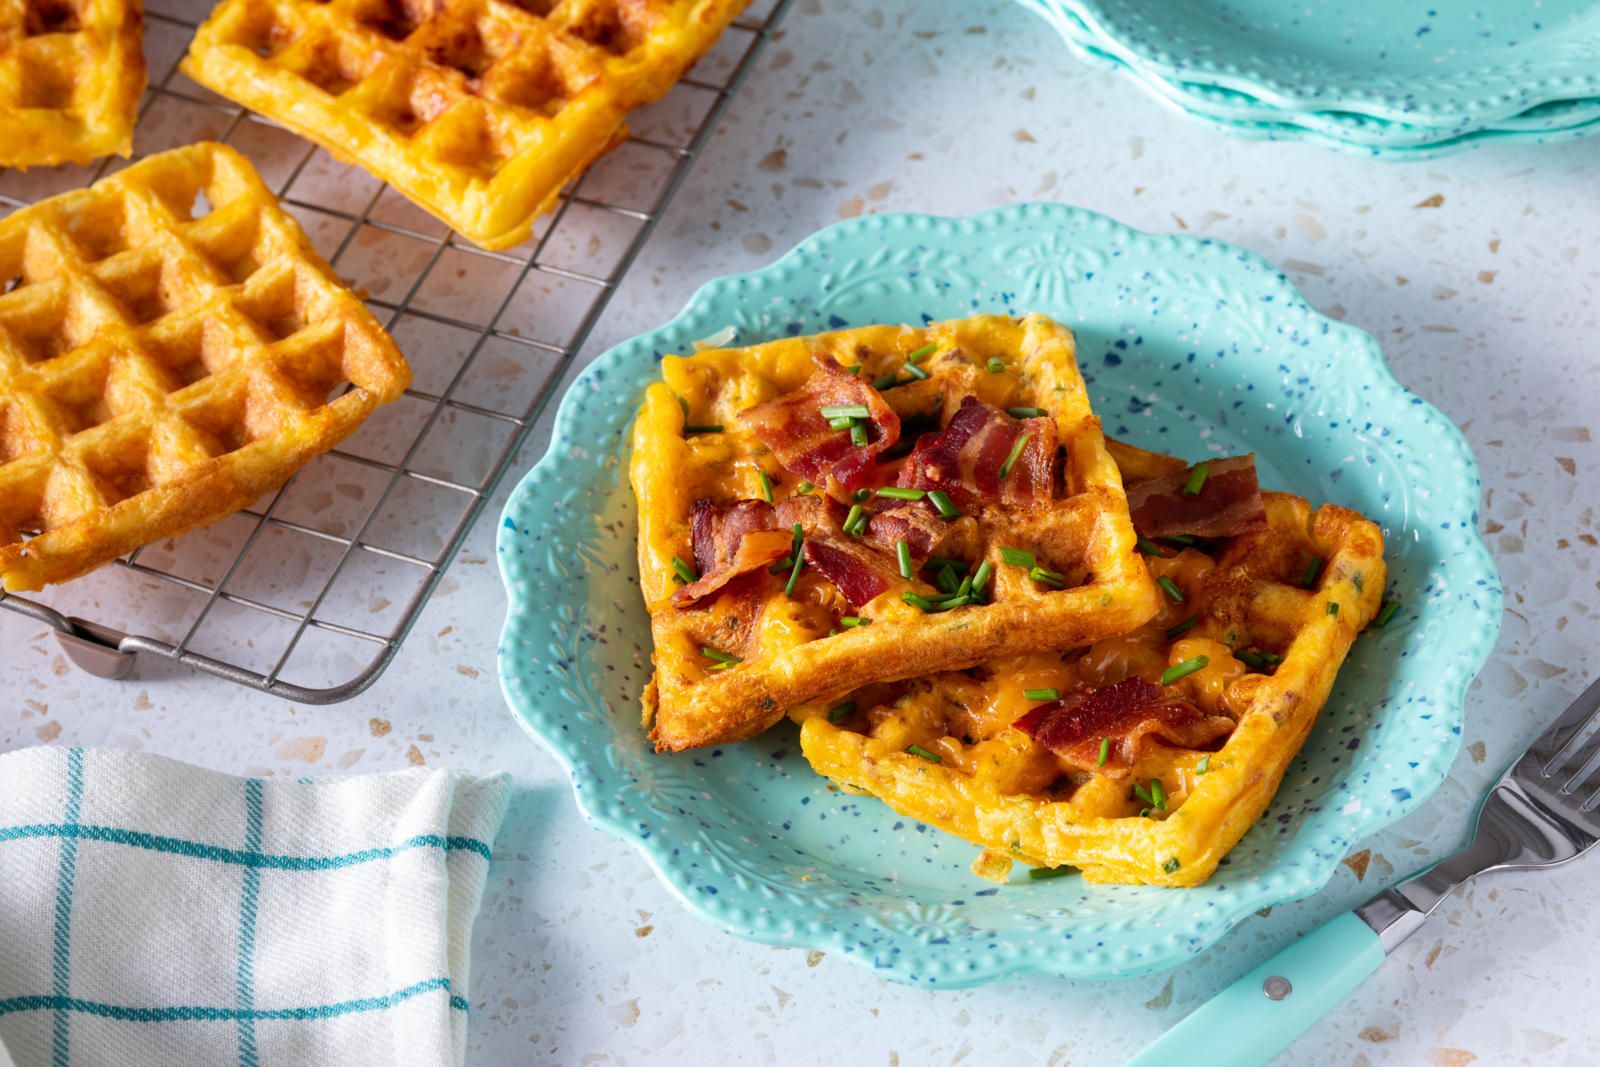 Easy Chaffle Recipe - The Girl Who Ate Everything